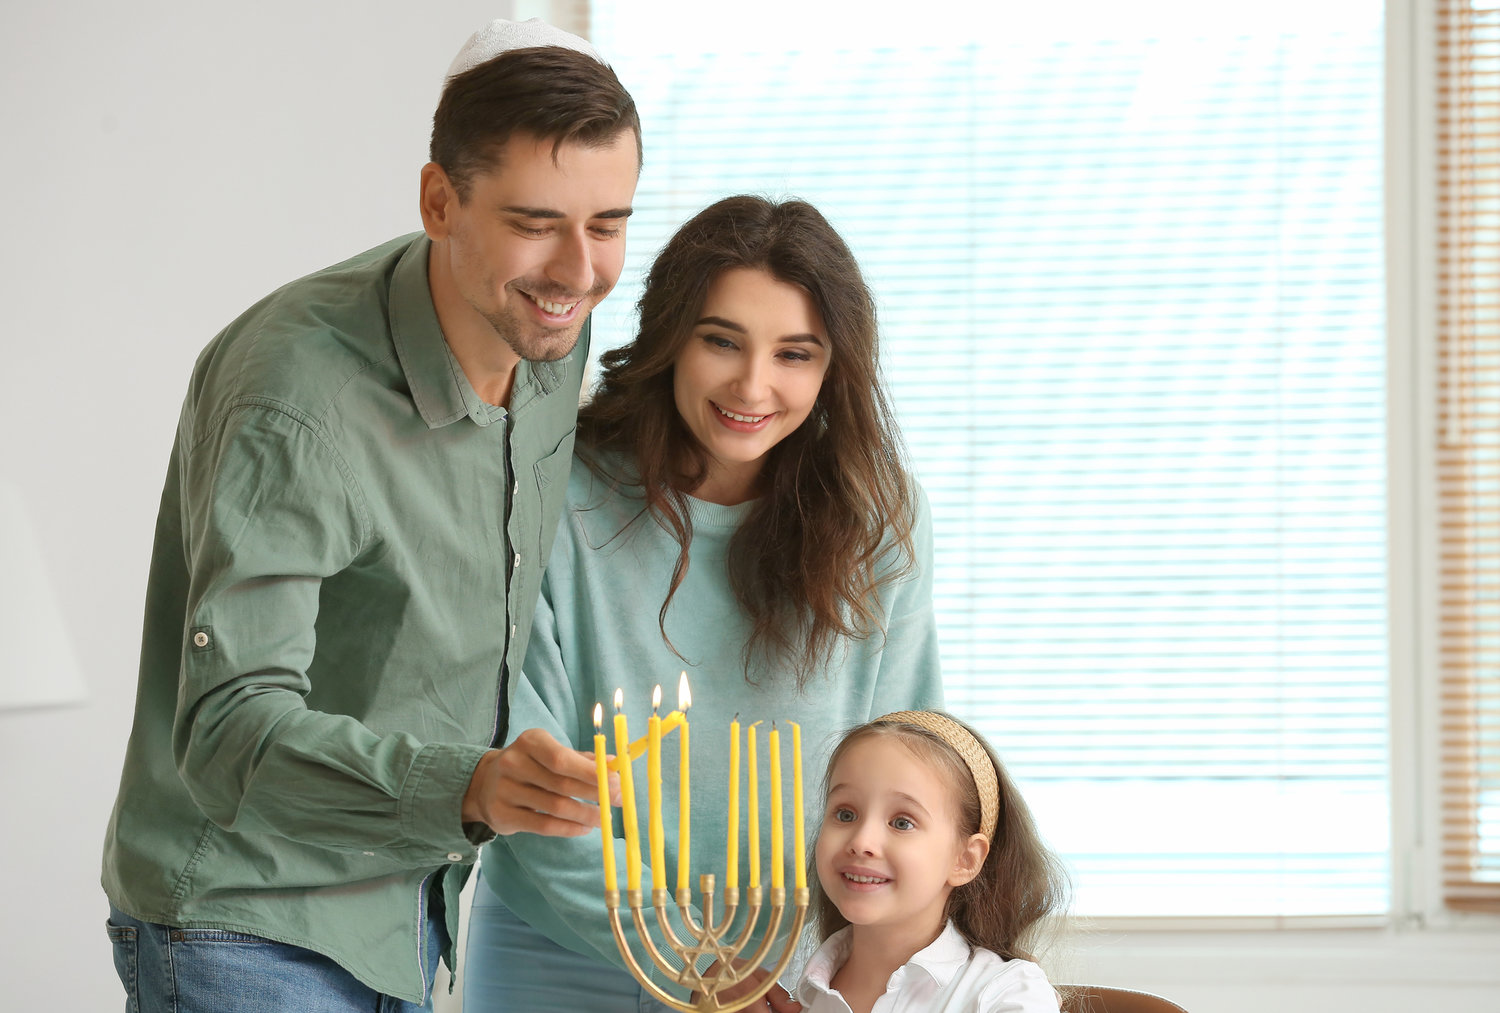 A Jewish family lighting candles for Hannukah at home. This image does not depict it, but many Jewish people are Jews of color with different appearances and backgrounds.